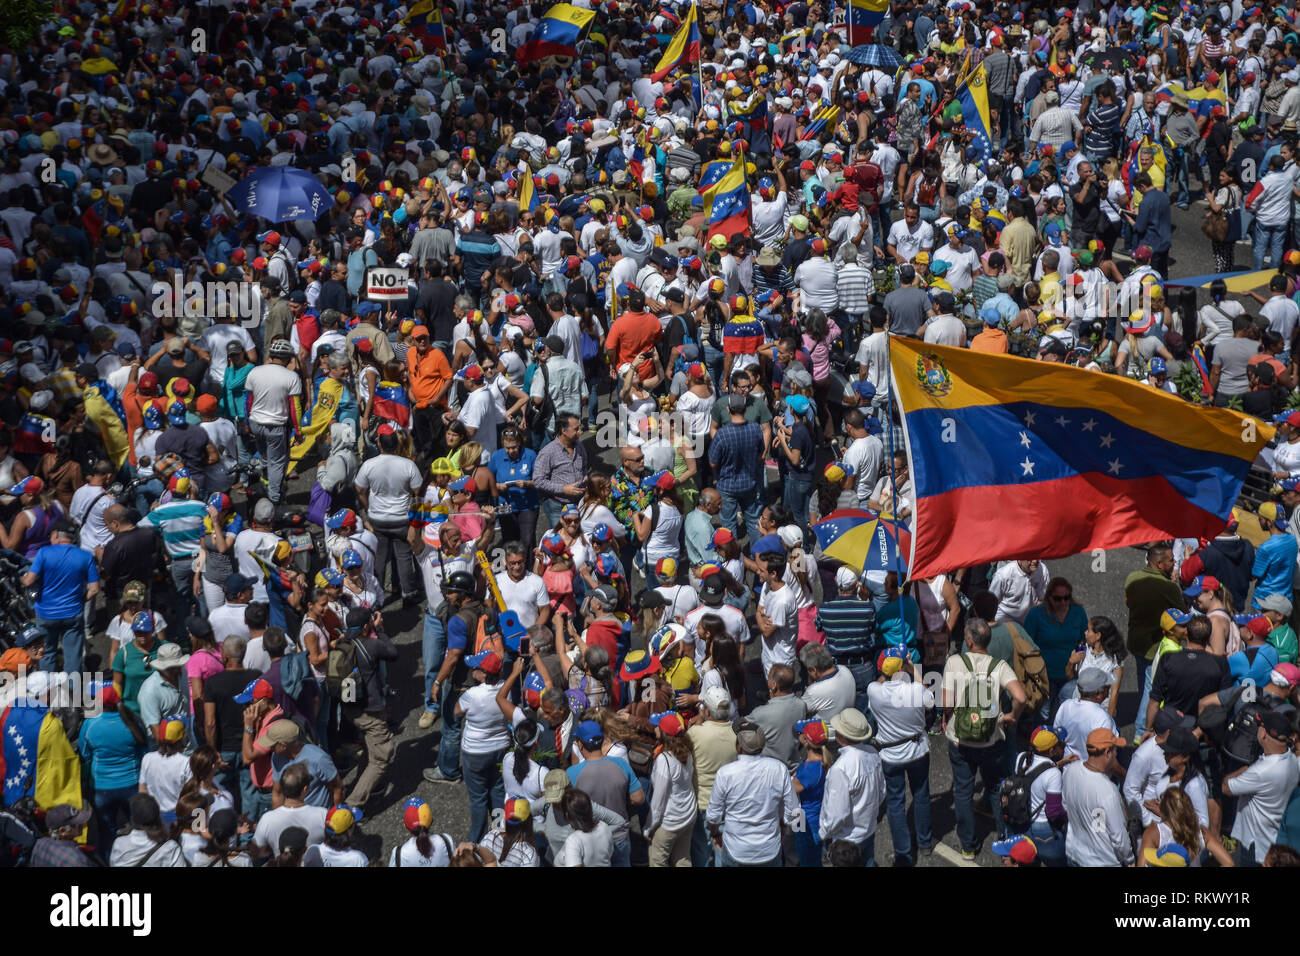 Caracas, Miranda, Venezuela. 12th Feb, 2019. A general view of the crowd during a protest to call for a change in the government.Opponents gather at a protest organised by the PSUV (United Socialist Party of Venezuela) after the call from interim president Juan Guaido, to show their support to him, while asking the army to allow more humanitarian aids into the country. Credit: Roman Camacho/SOPA Images/ZUMA Wire/Alamy Live News Stock Photo